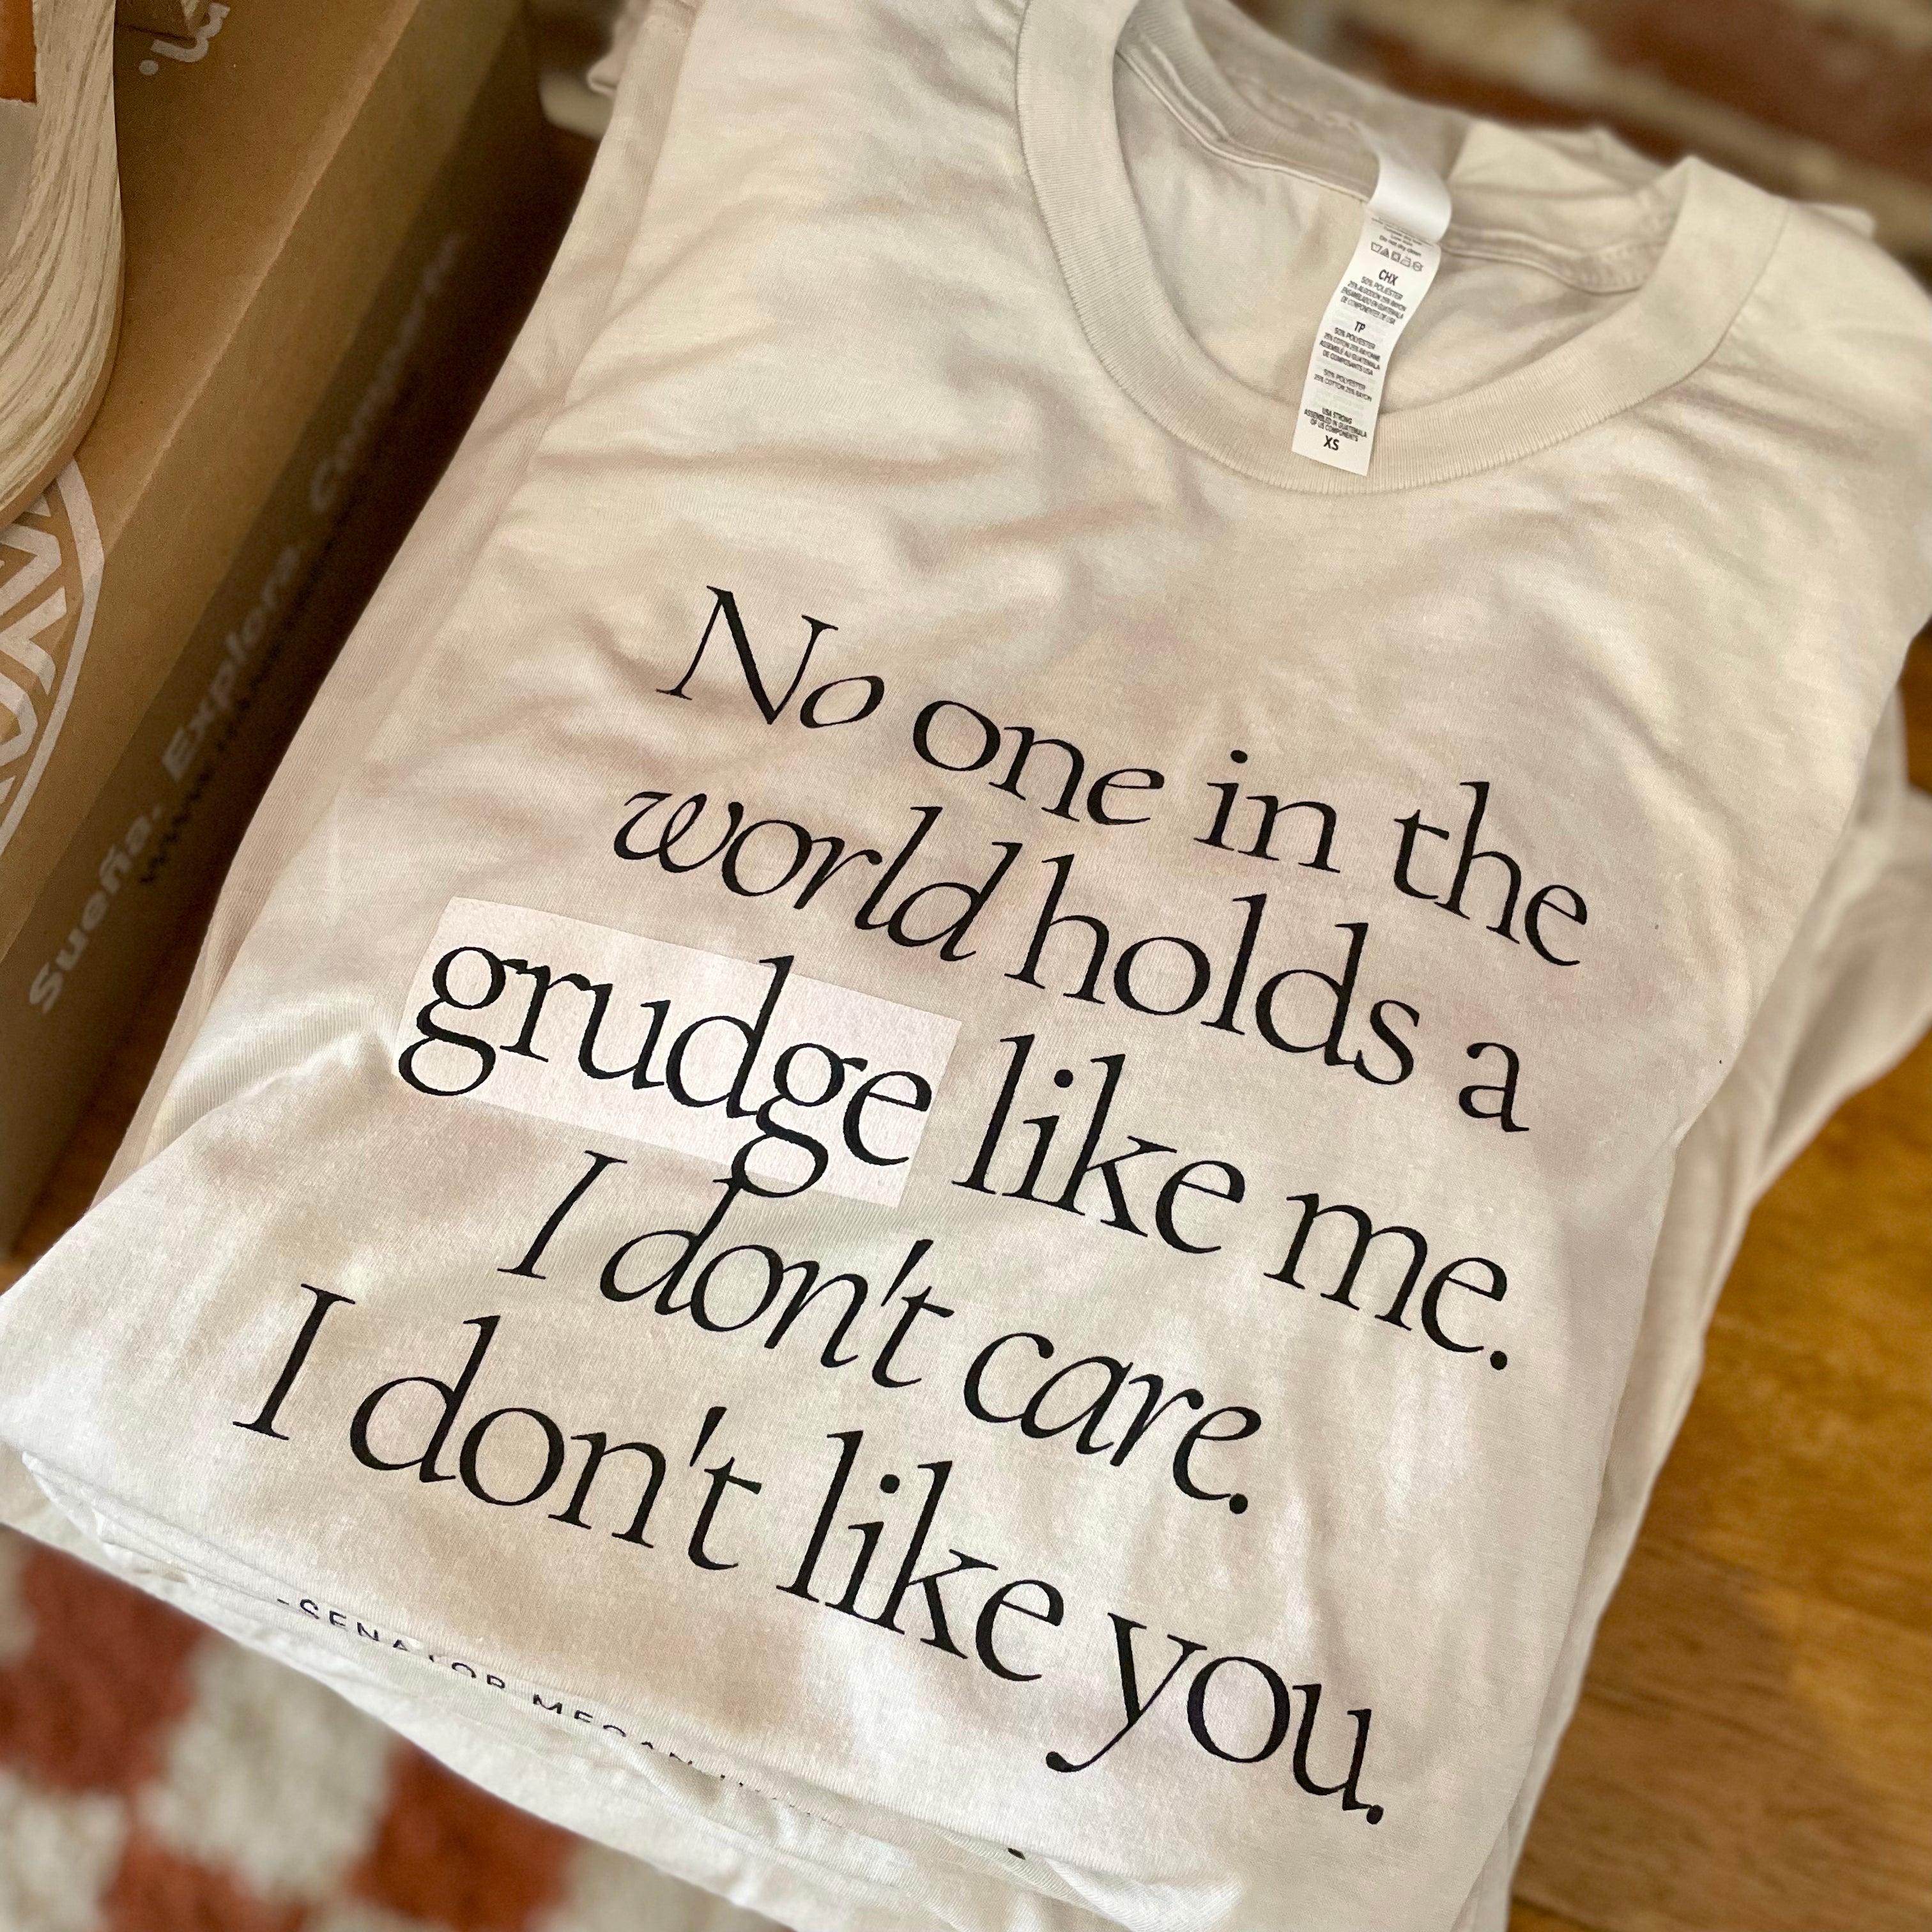 No one Holds a Grudge T-Shirt